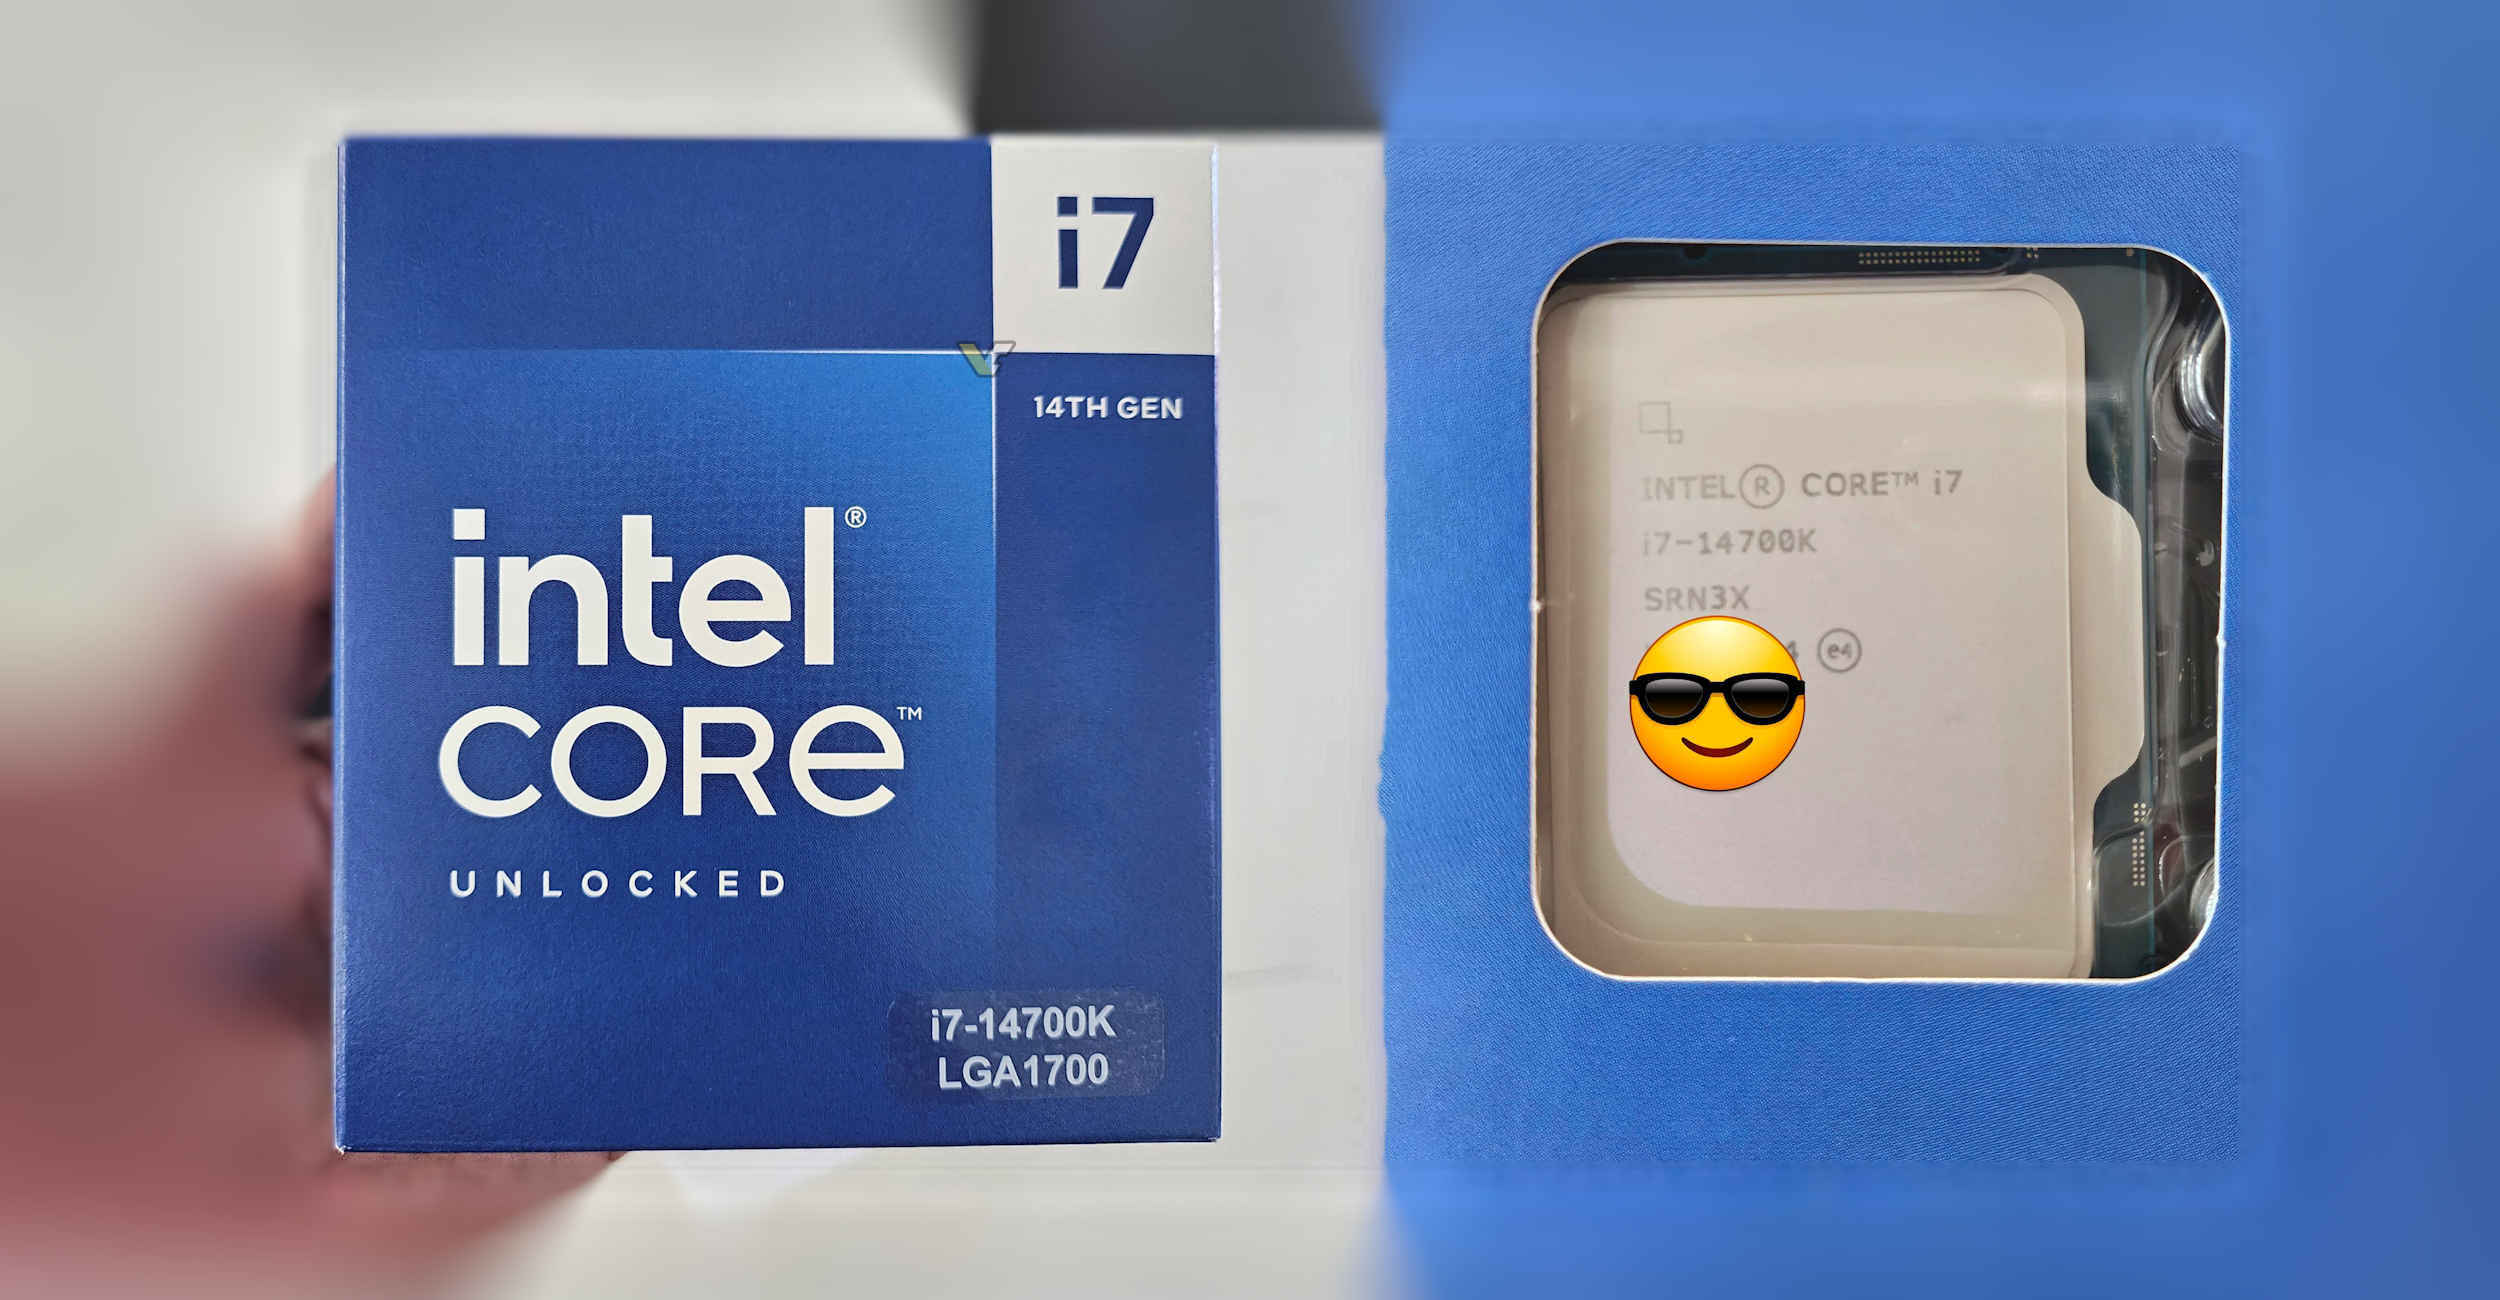 Intel Core i7-14700K goes on sale in Indonesia before official